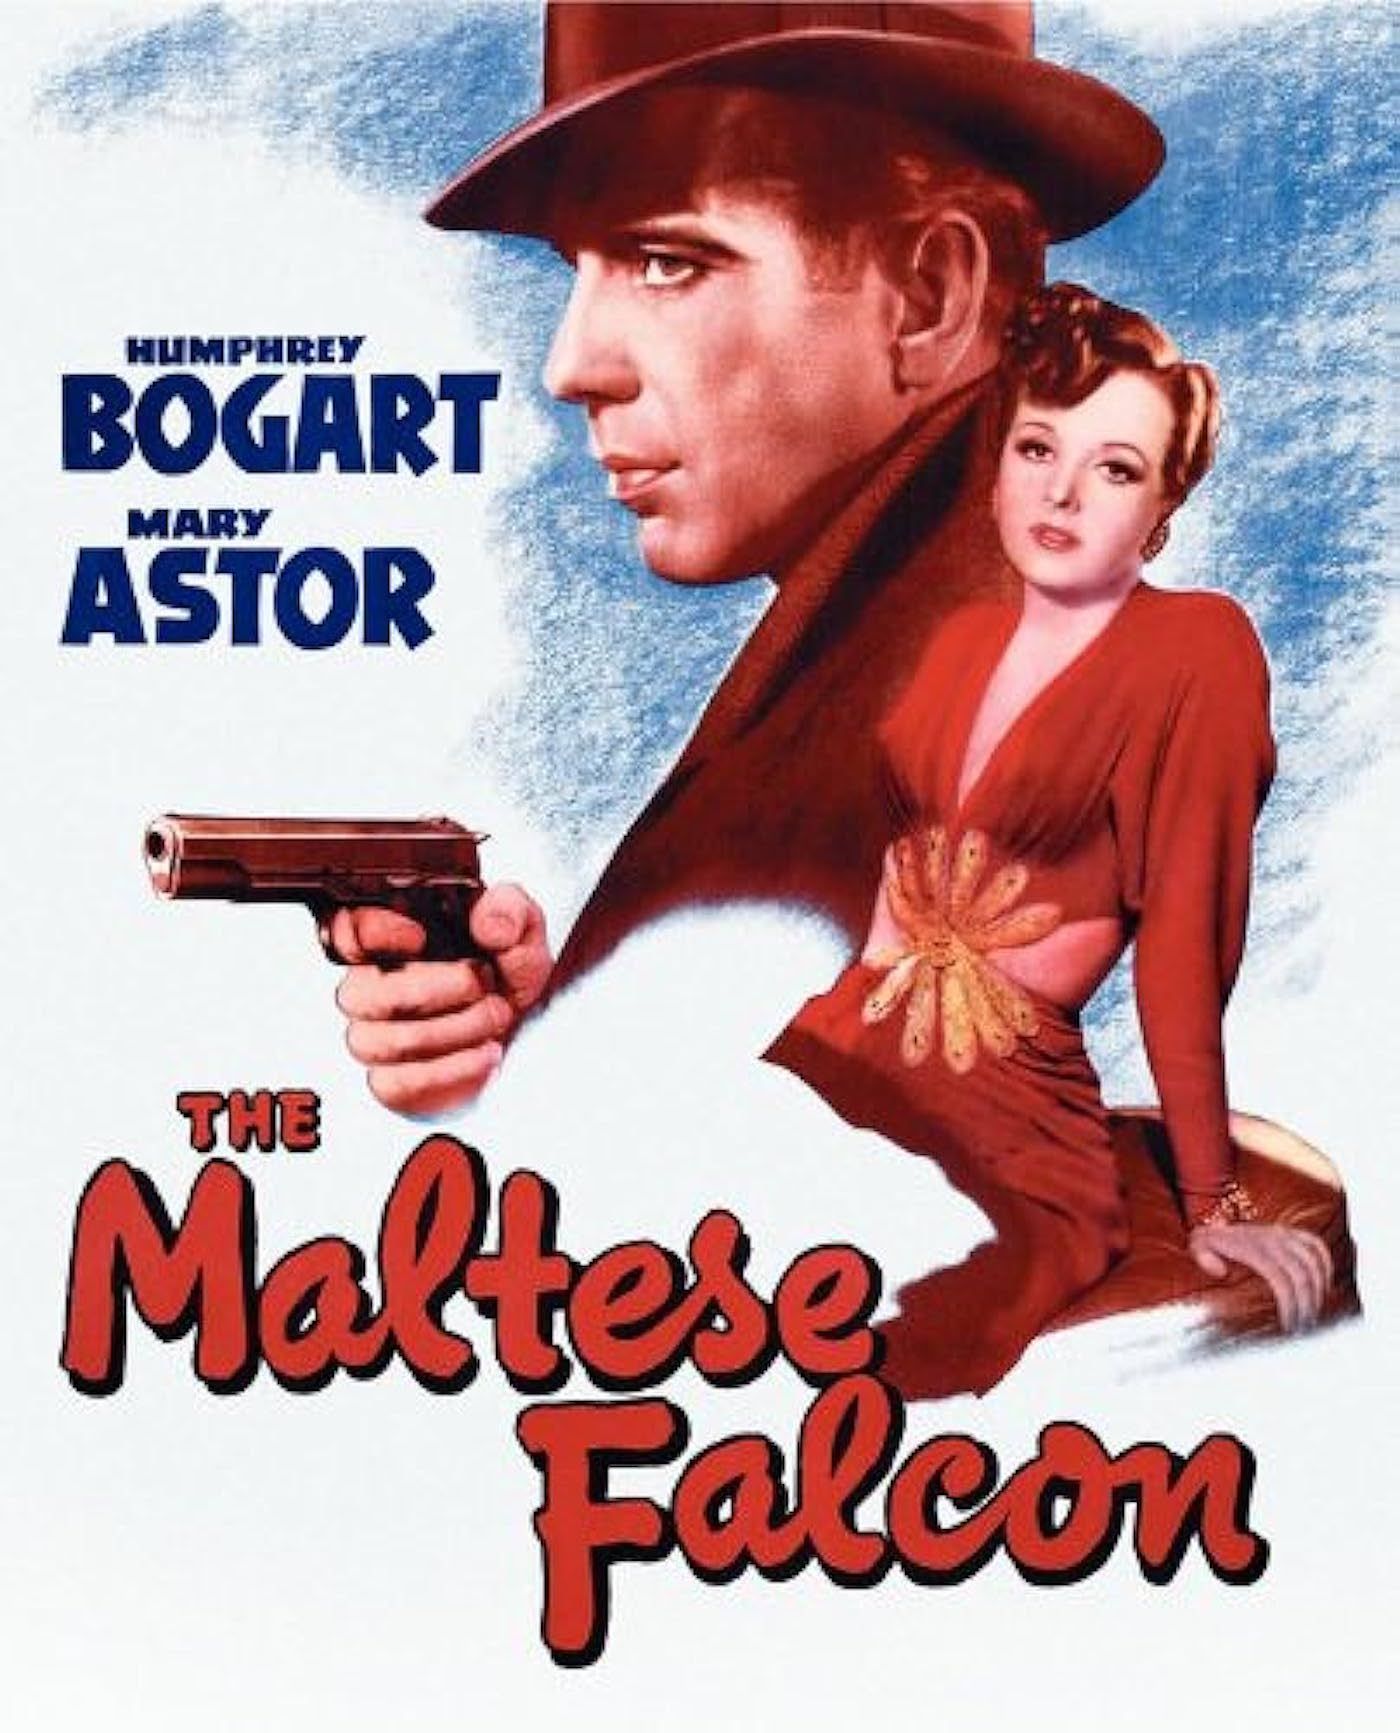 humphrey bogart featured on The Maltese Falcon movie poster